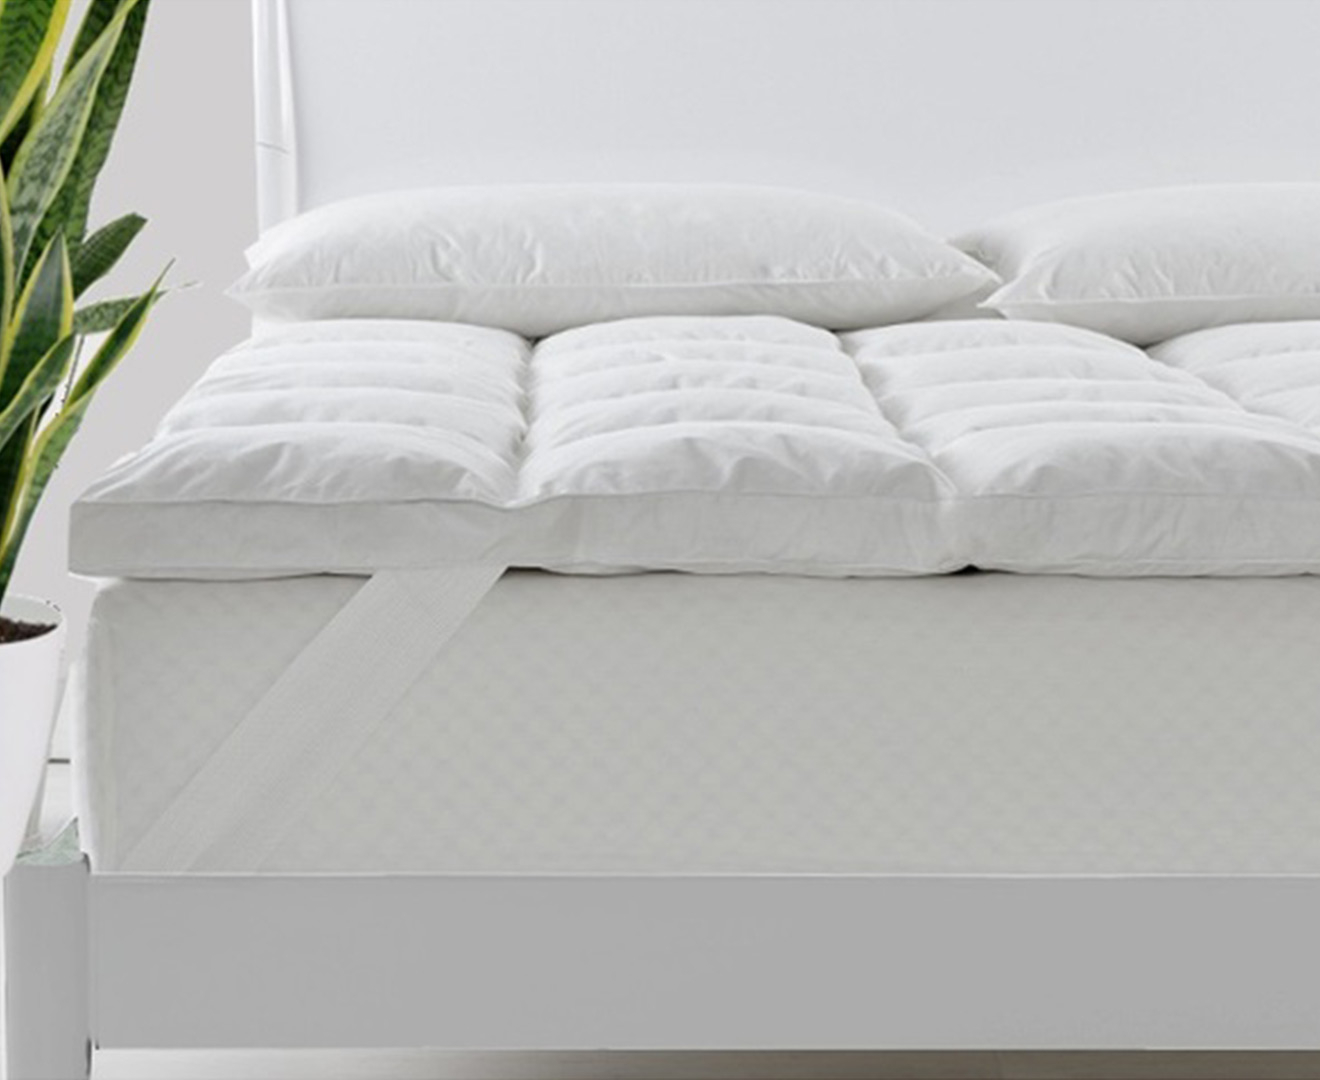 silentnight duck feather and down mattress topper review